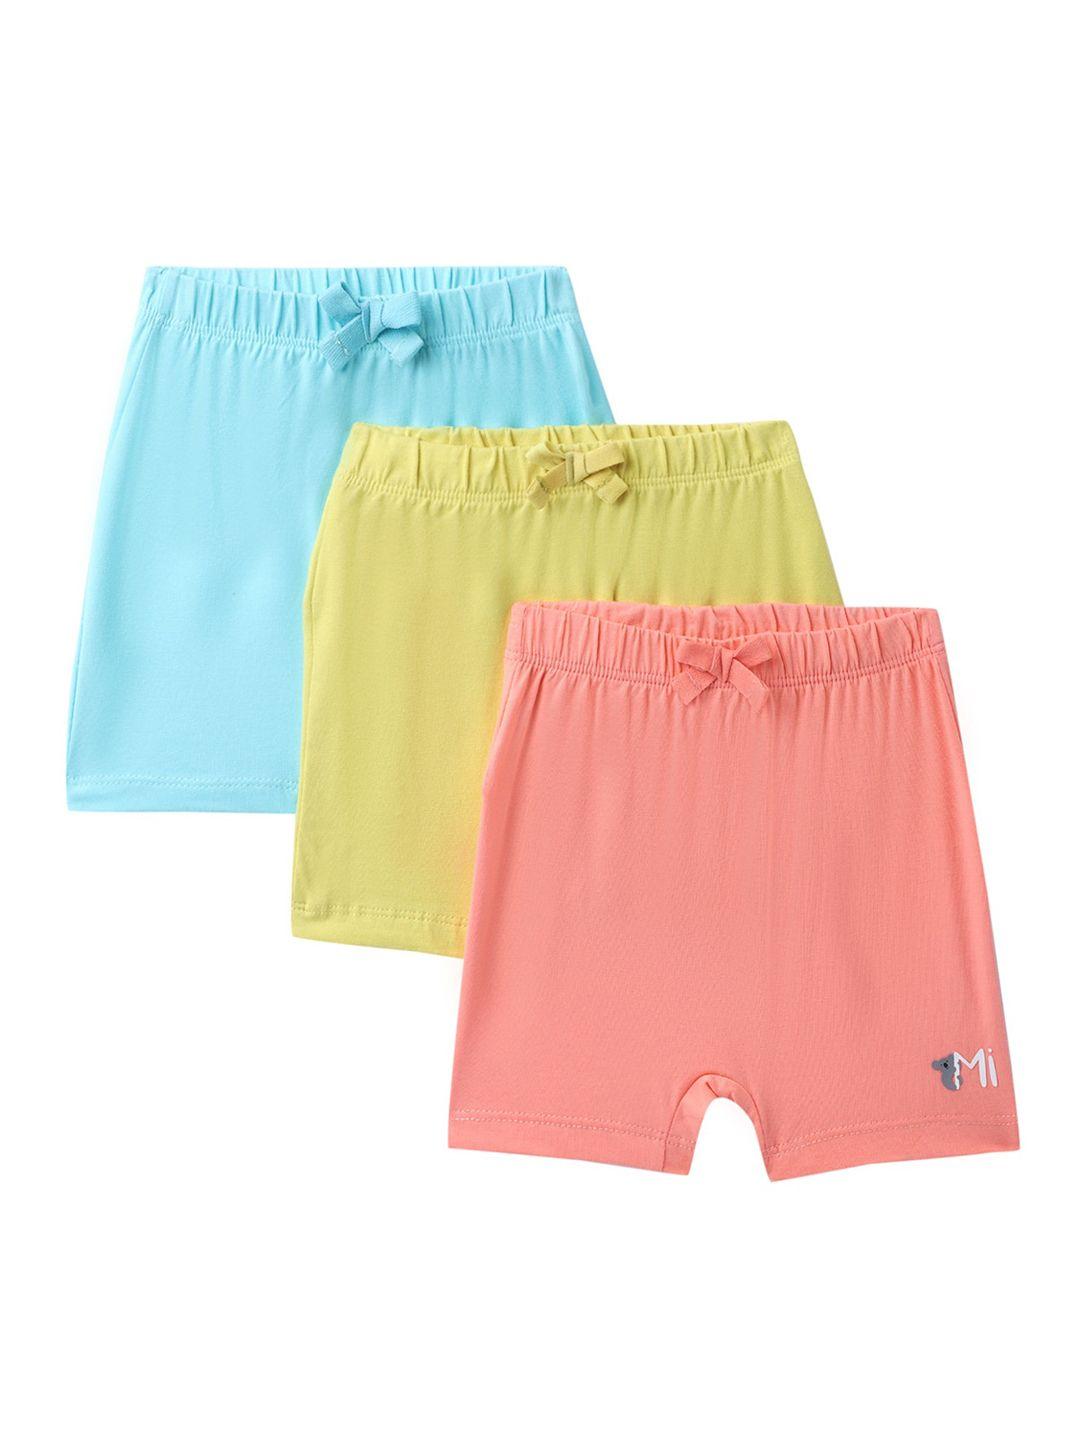 miarcus kids pack of 3 sports shorts